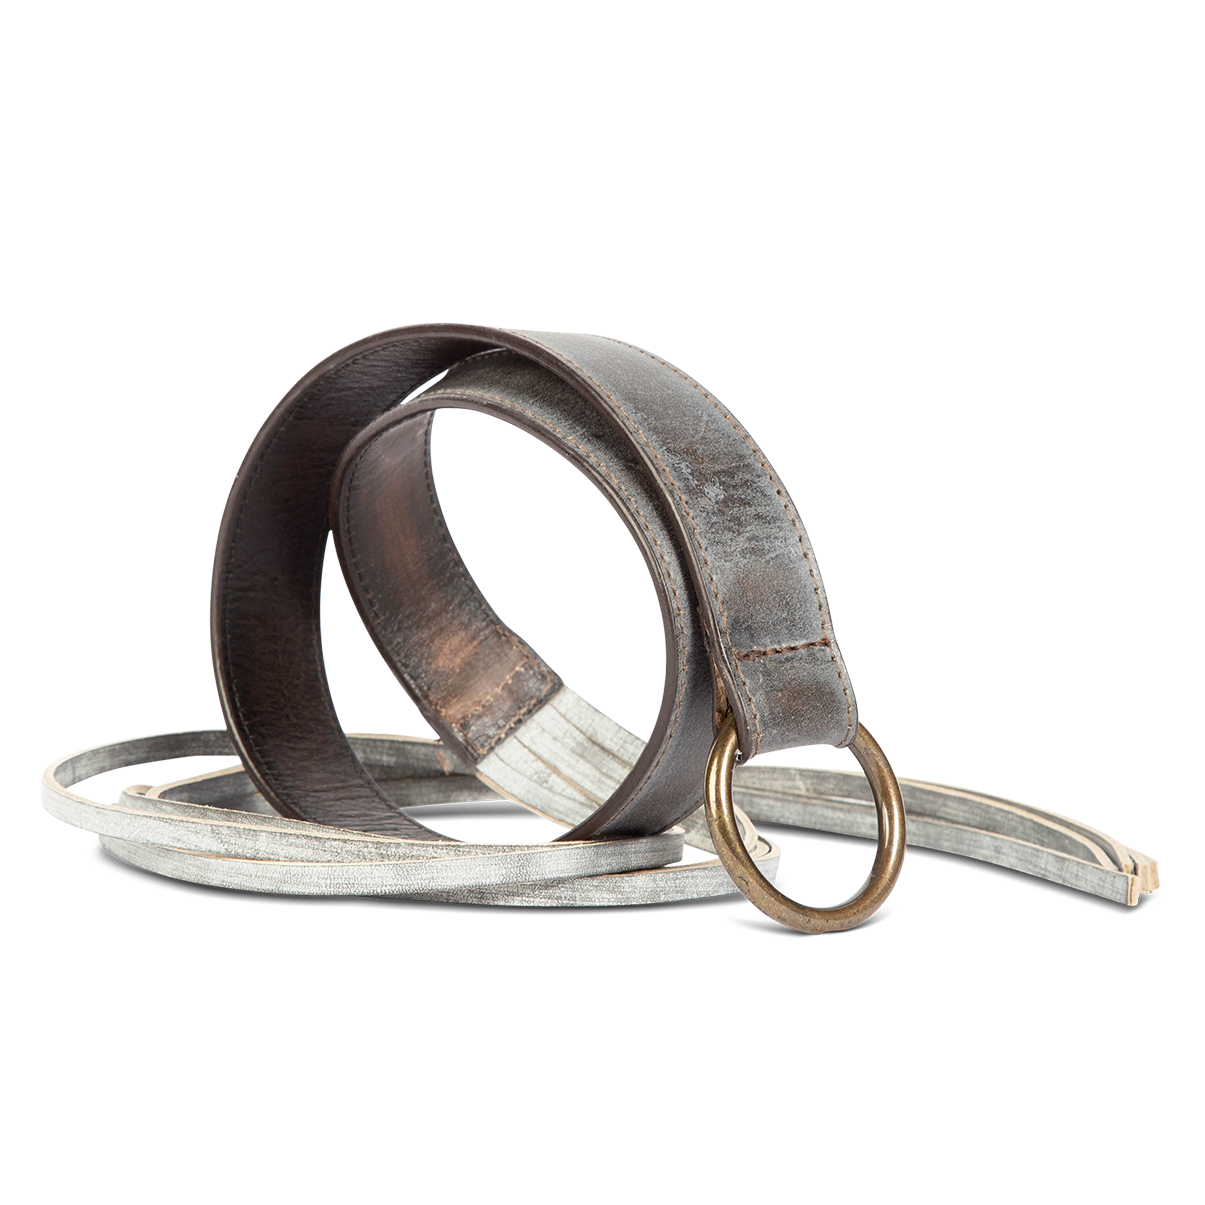 Tassel ice side view featuring full grain leather belt featuring rustic loop and tassel detailing on FREEBIRD full grain leather belt